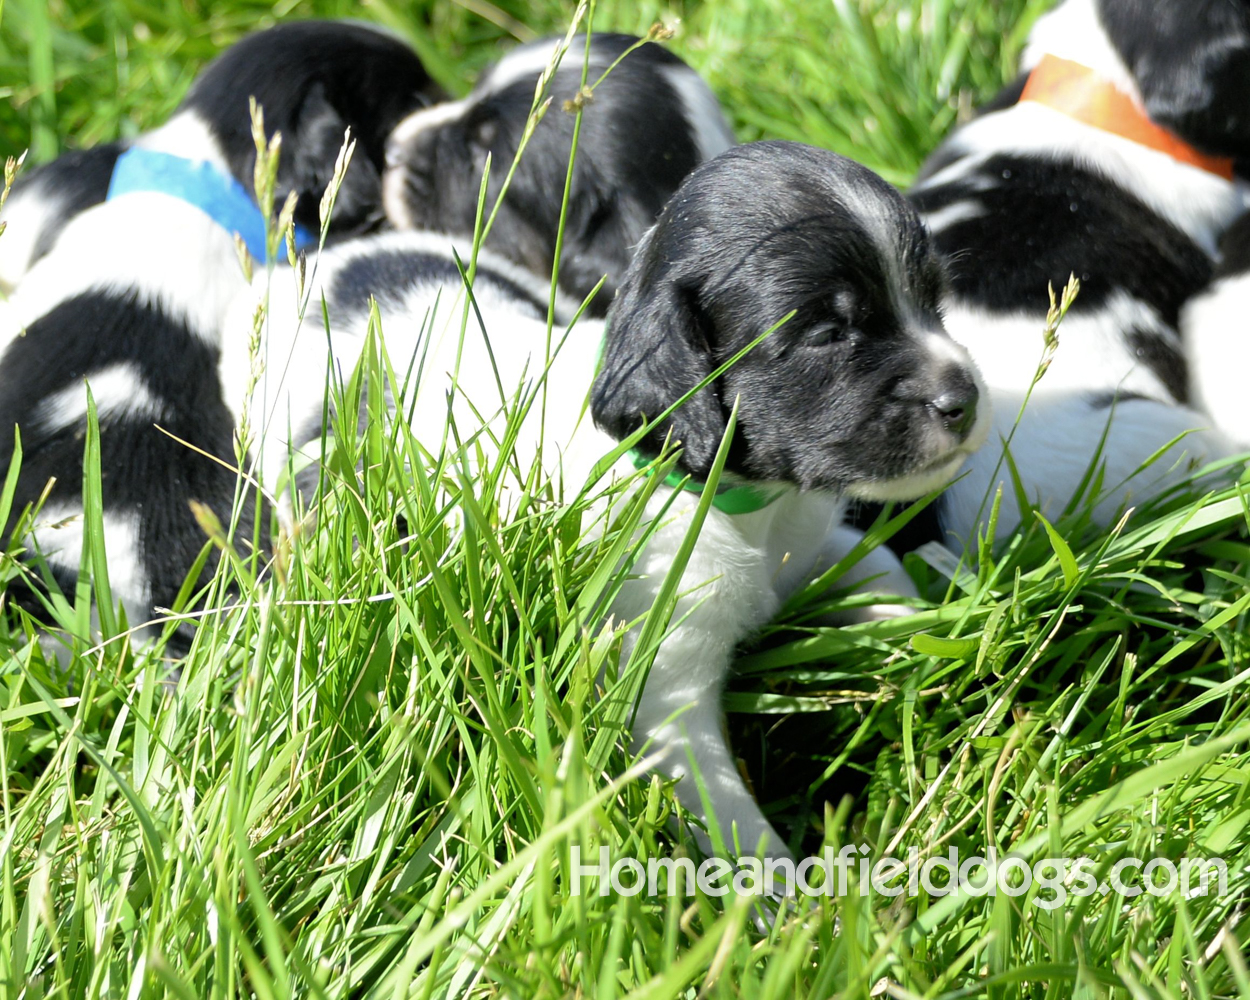 Pictures of young french brittany puppies outside in the son and grass with kids